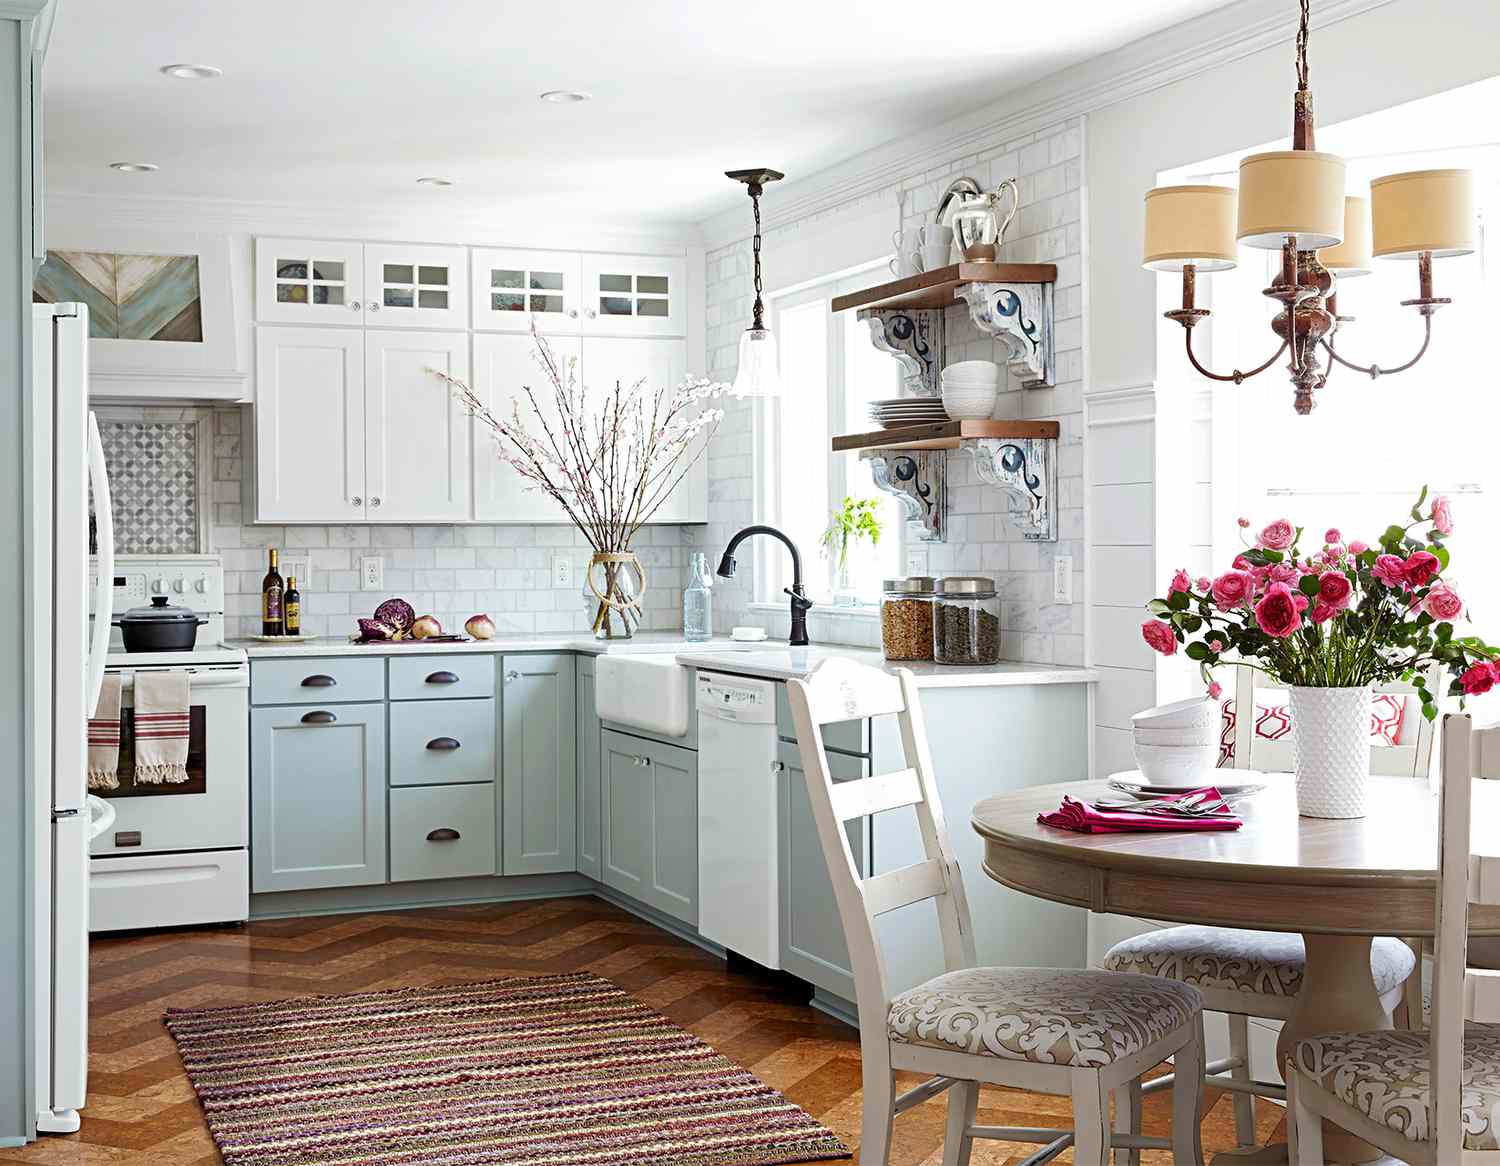 Make a Small Kitchen Look Larger | Better Homes & Gardens